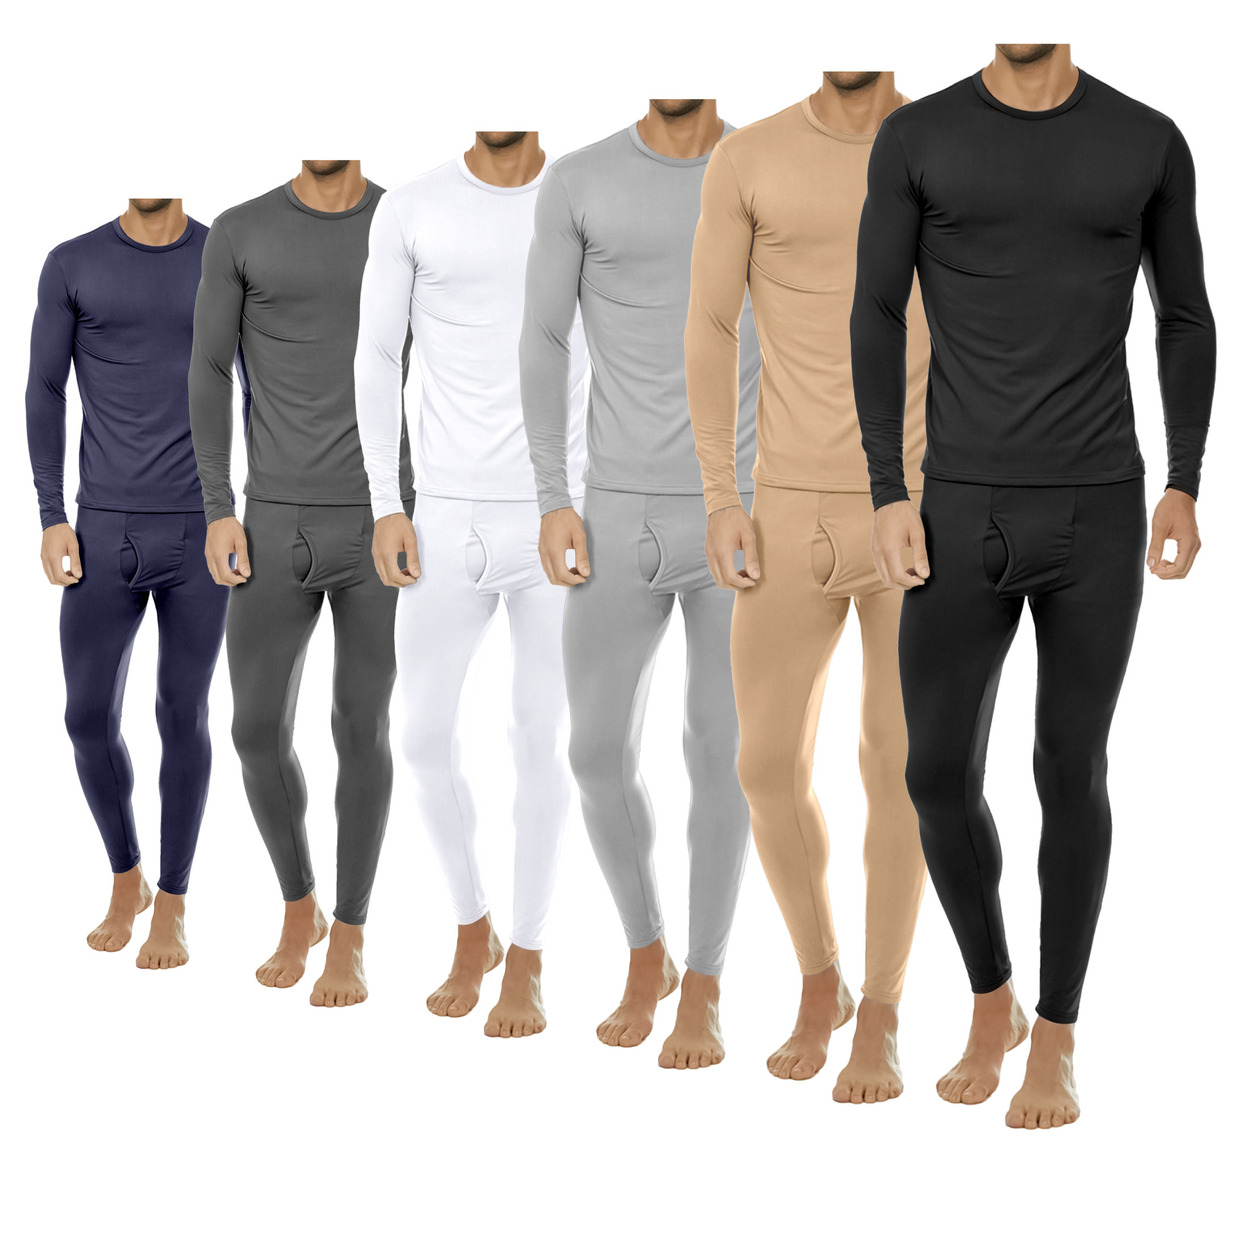 2-Sets: Men's Winter Warm Fleece Lined Thermal Underwear Set For Cold Weather - Grey&navy, Xx-large